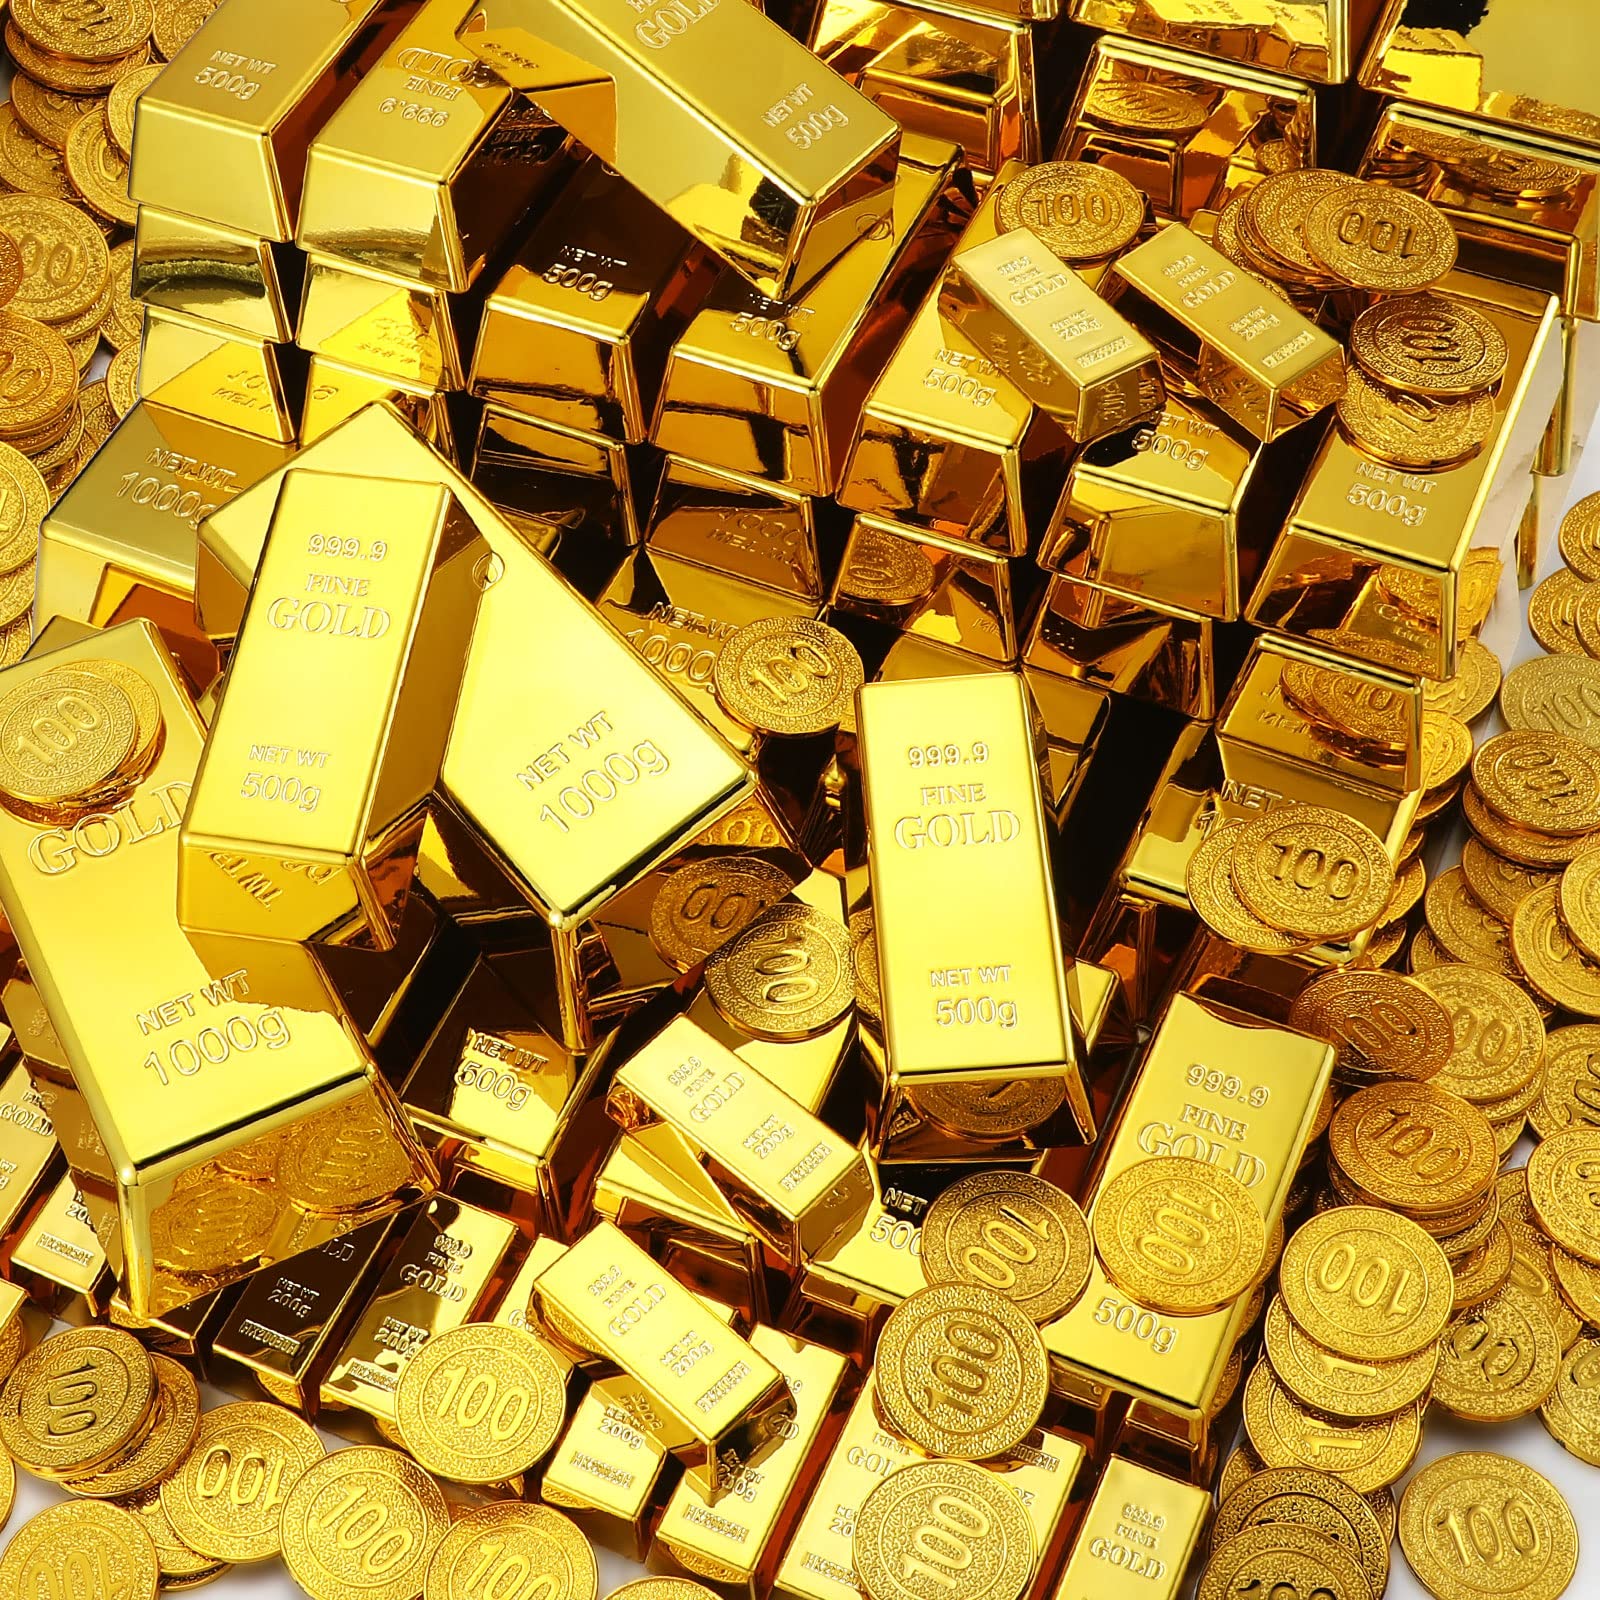 Gold coins or bars.